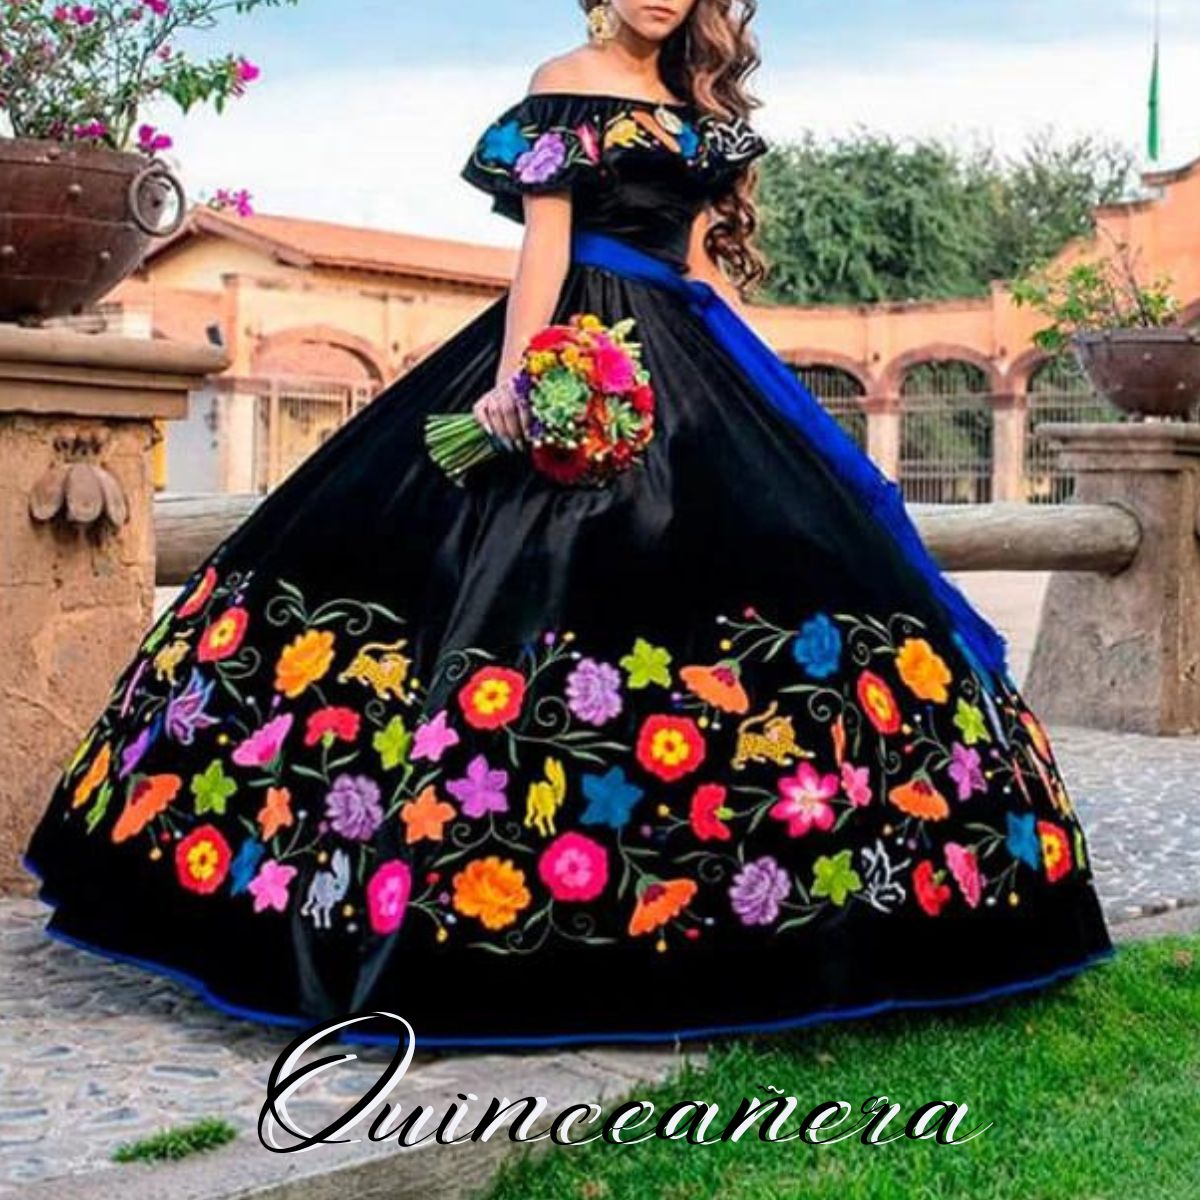 Quinceanera Dress Black with Embroidery Floral Charro Vestido De 15 Años Off the Shoulder Sweet 16 Prom Gowns